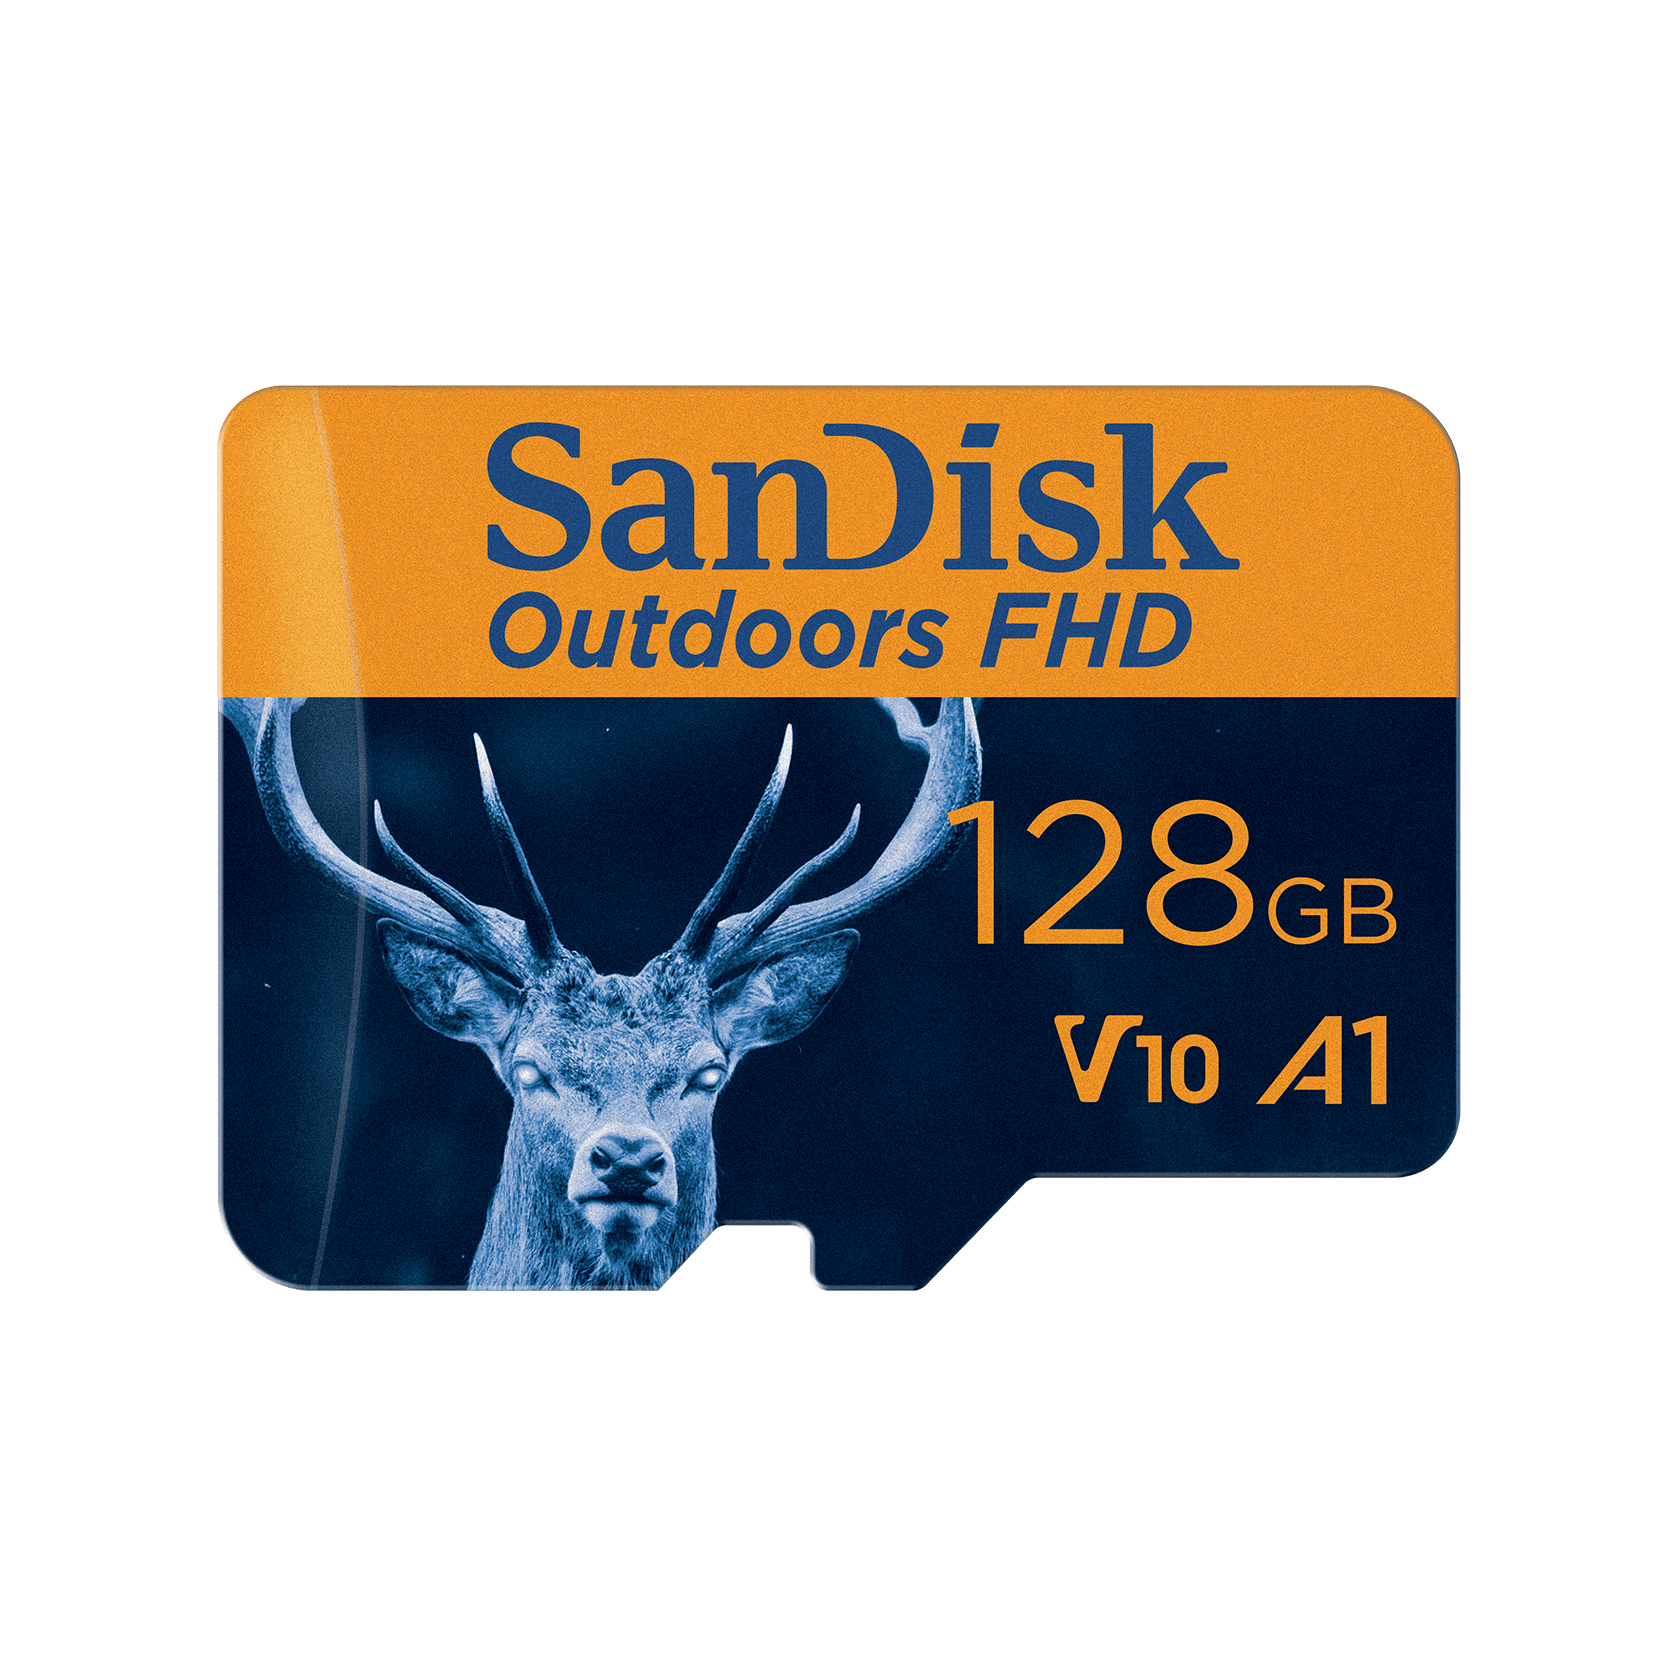 SanDisk Outdoors FHD MicroSDXC UHS-I Card With SD Adapter - 128GB Single Pack - SDSQUBC-128G-GN6VA